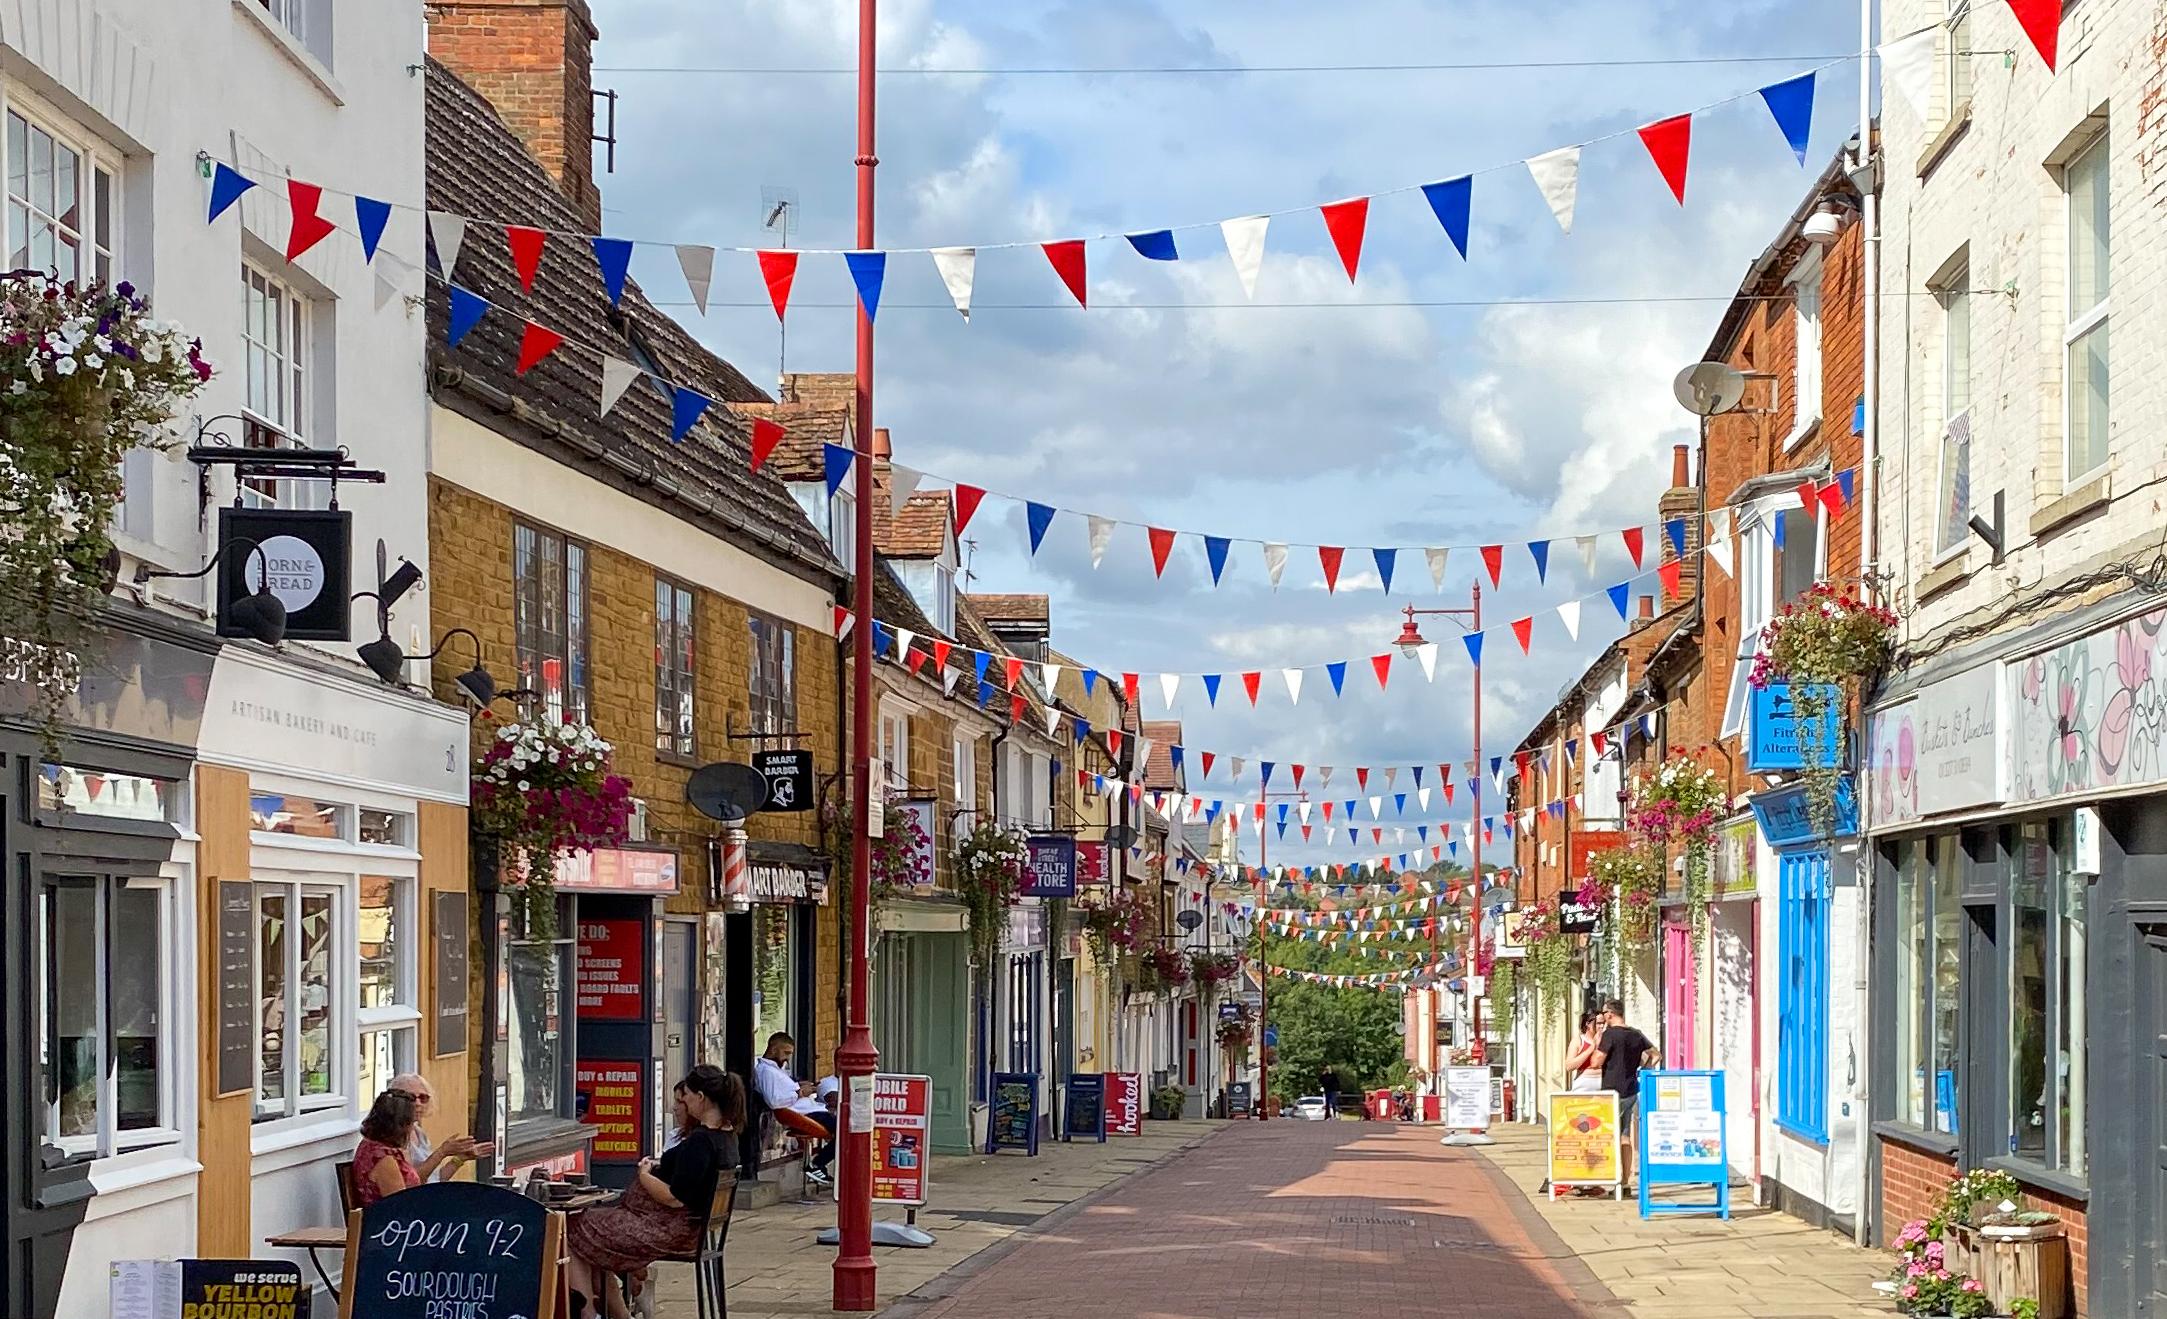 Sheaf Street, Daventry on a sunny day with bunting and outdoor cafe seating - rectangular image